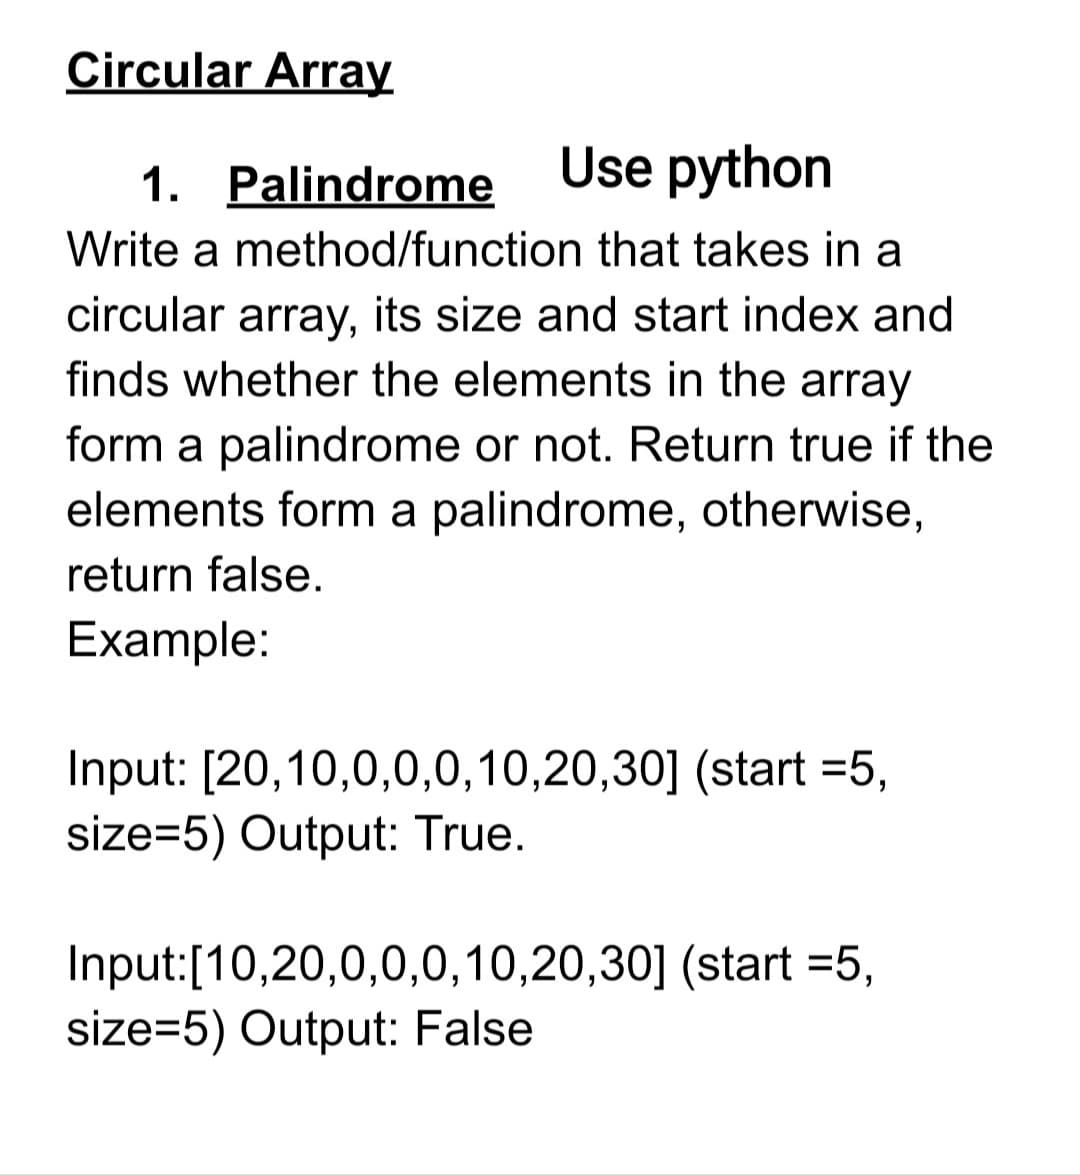 Circular Array
1. Palindrome
Use python
Write a method/function that takes in a
circular array, its size and start index and
finds whether the elements in the array
form a palindrome or not. Return true if the
elements form a palindrome, otherwise,
return false.
Example:
Input: [20,10,0,0,0,10,20,30] (start =5,
size=5) Output: True.
Input:[10,20,0,0,0,10,20,30] (start =5,
size=5) Output: False
